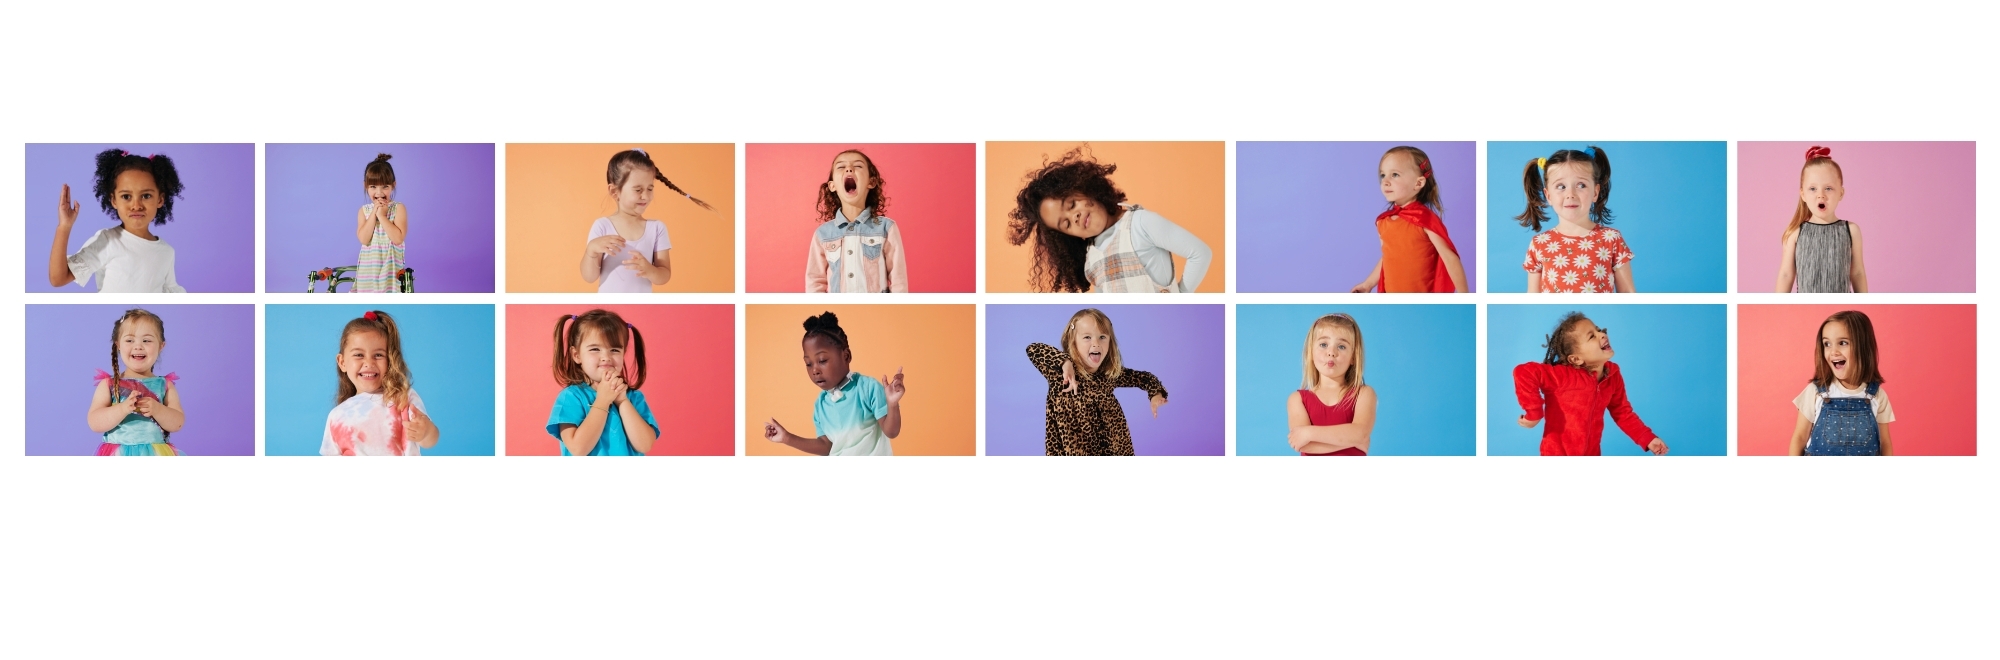 Girlguiding shows the true face of four-year-old girls with stereotype challenging campaign